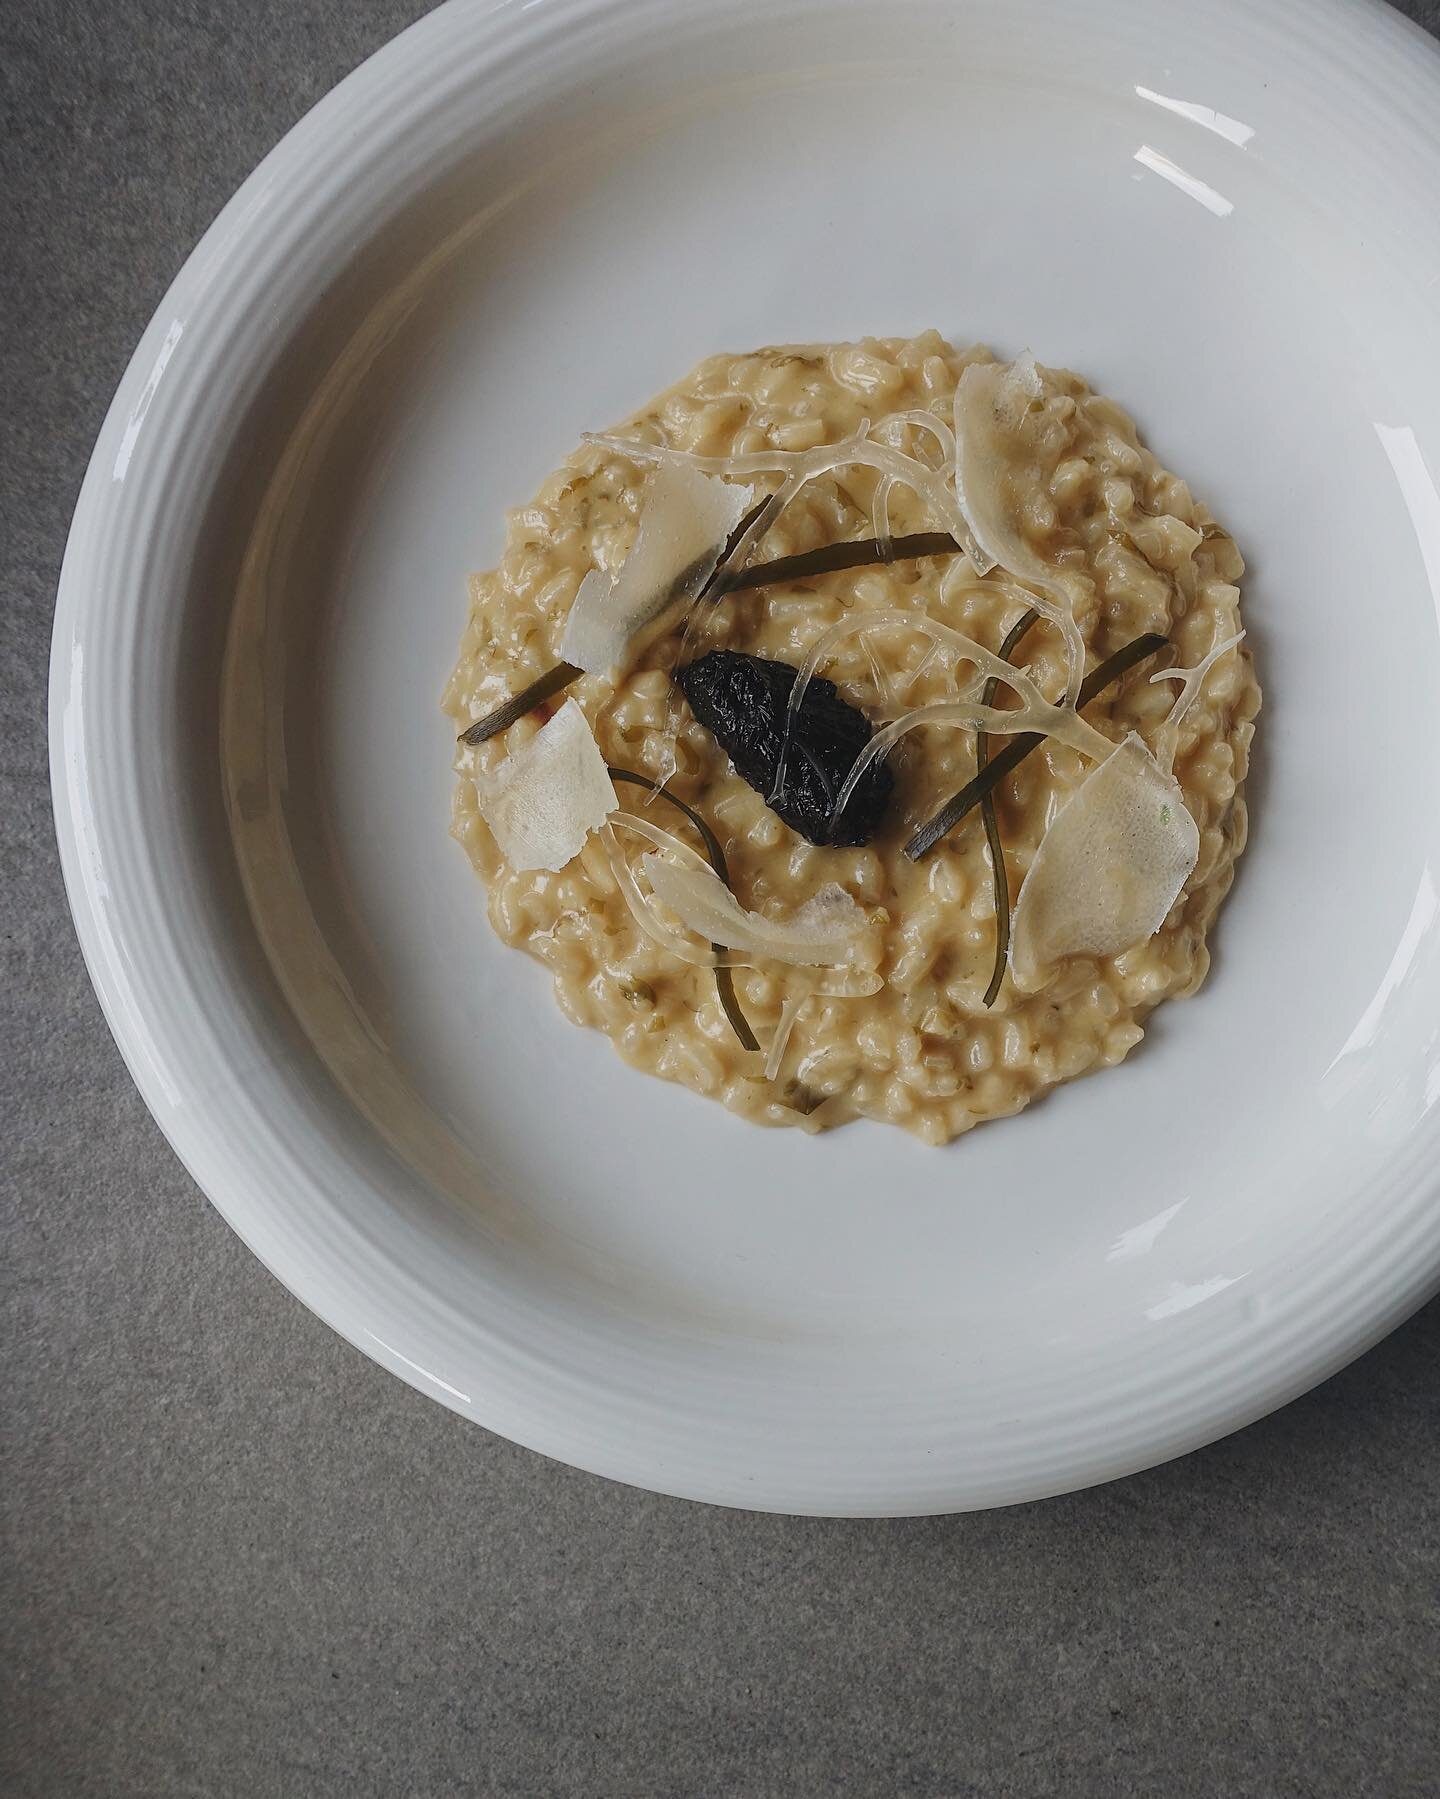 Our Kombu Risotto &mdash; so much umami in a bowl

Make your reservation with us today! Link in bio.